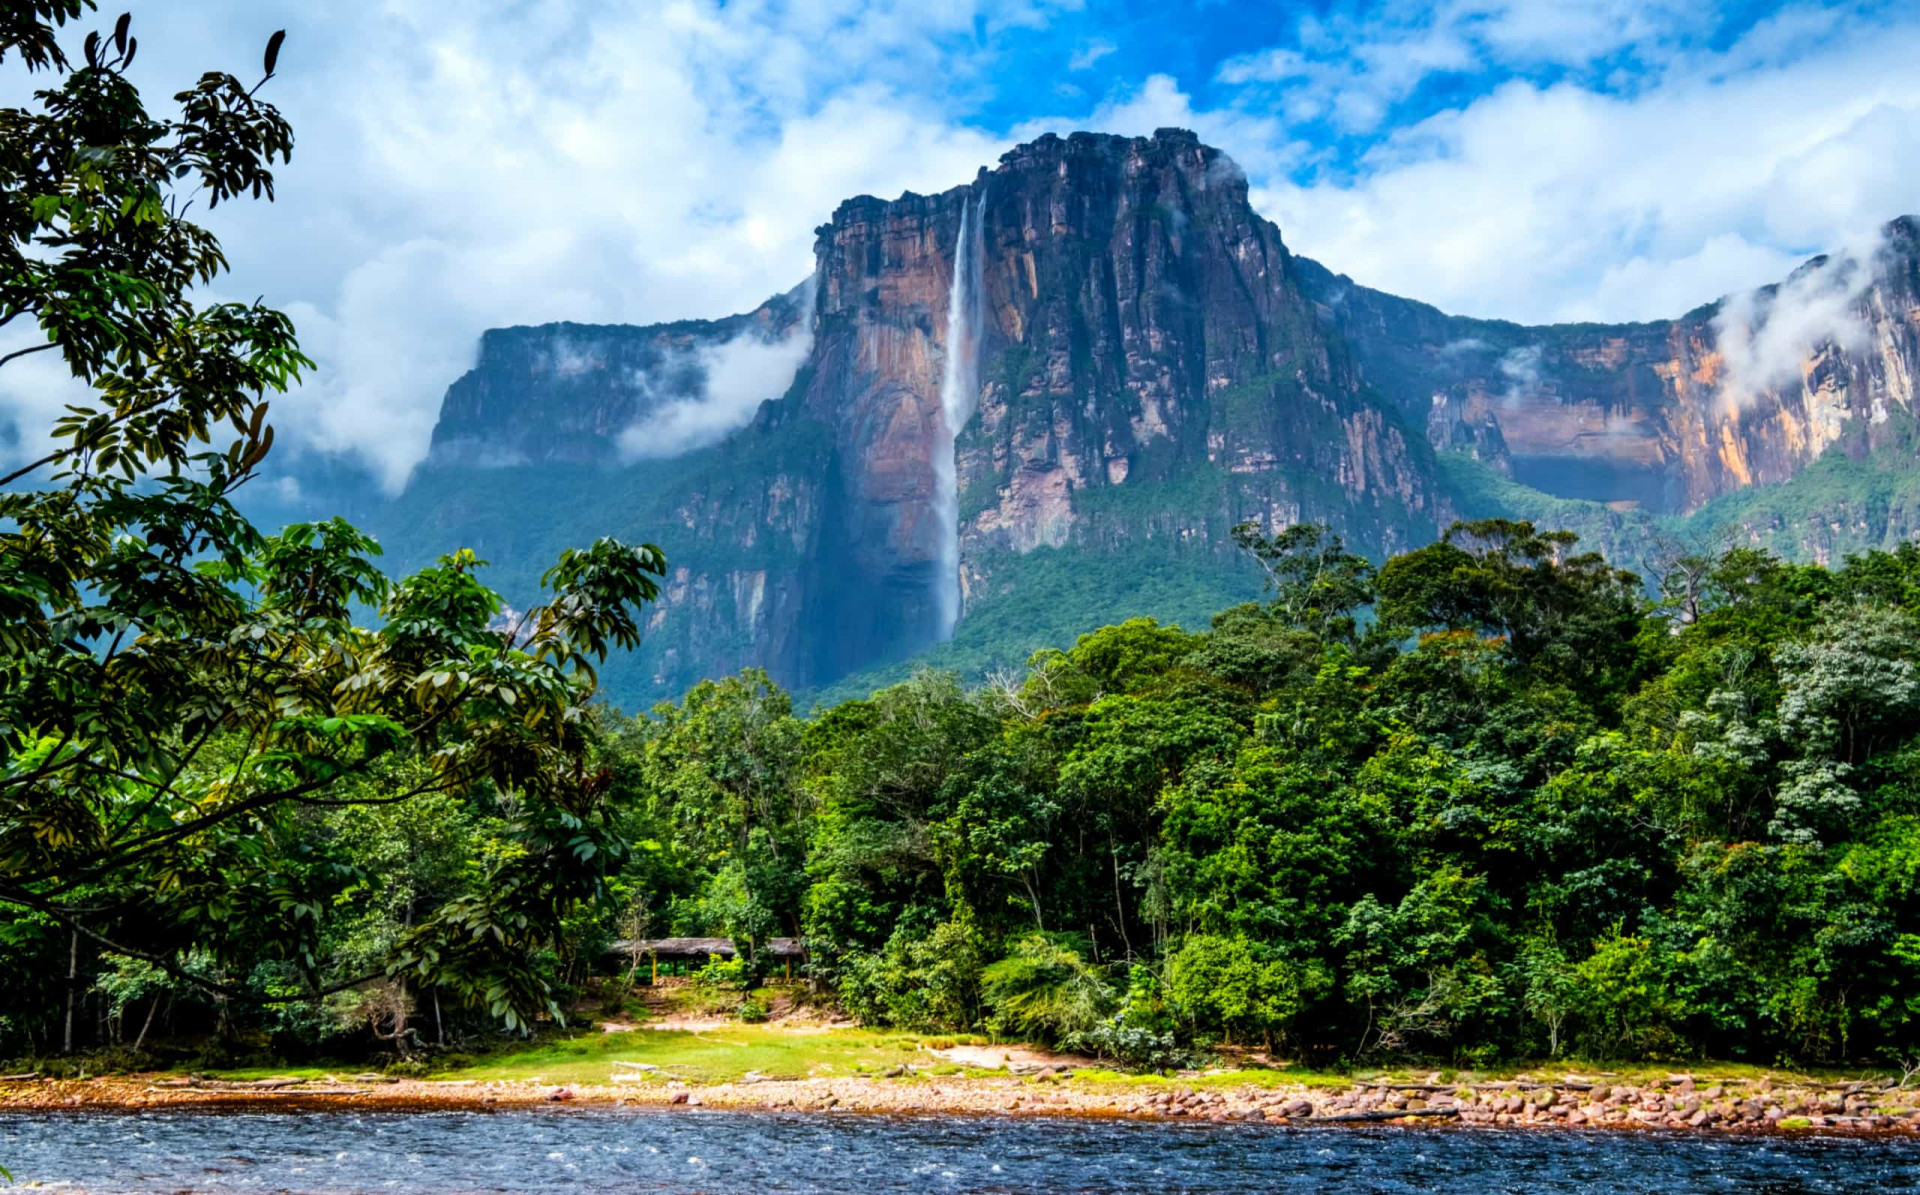 Location: Bolivar<br>Criteria: Natural<br>Year established: 1994<br>Description: The impressive tabletop mountains, or <em>tepui,</em> that characterize the park are of great geographical and biological interest. Angel Falls (pictured), the highest waterfall in the world, is included in the site.<p><a href="https://www.msn.com/en-us/community/channel/vid-7xx8mnucu55yw63we9va2gwr7uihbxwc68fxqp25x6tg4ftibpra?cvid=94631541bc0f4f89bfd59158d696ad7e">Follow us and access great exclusive content every day</a></p>